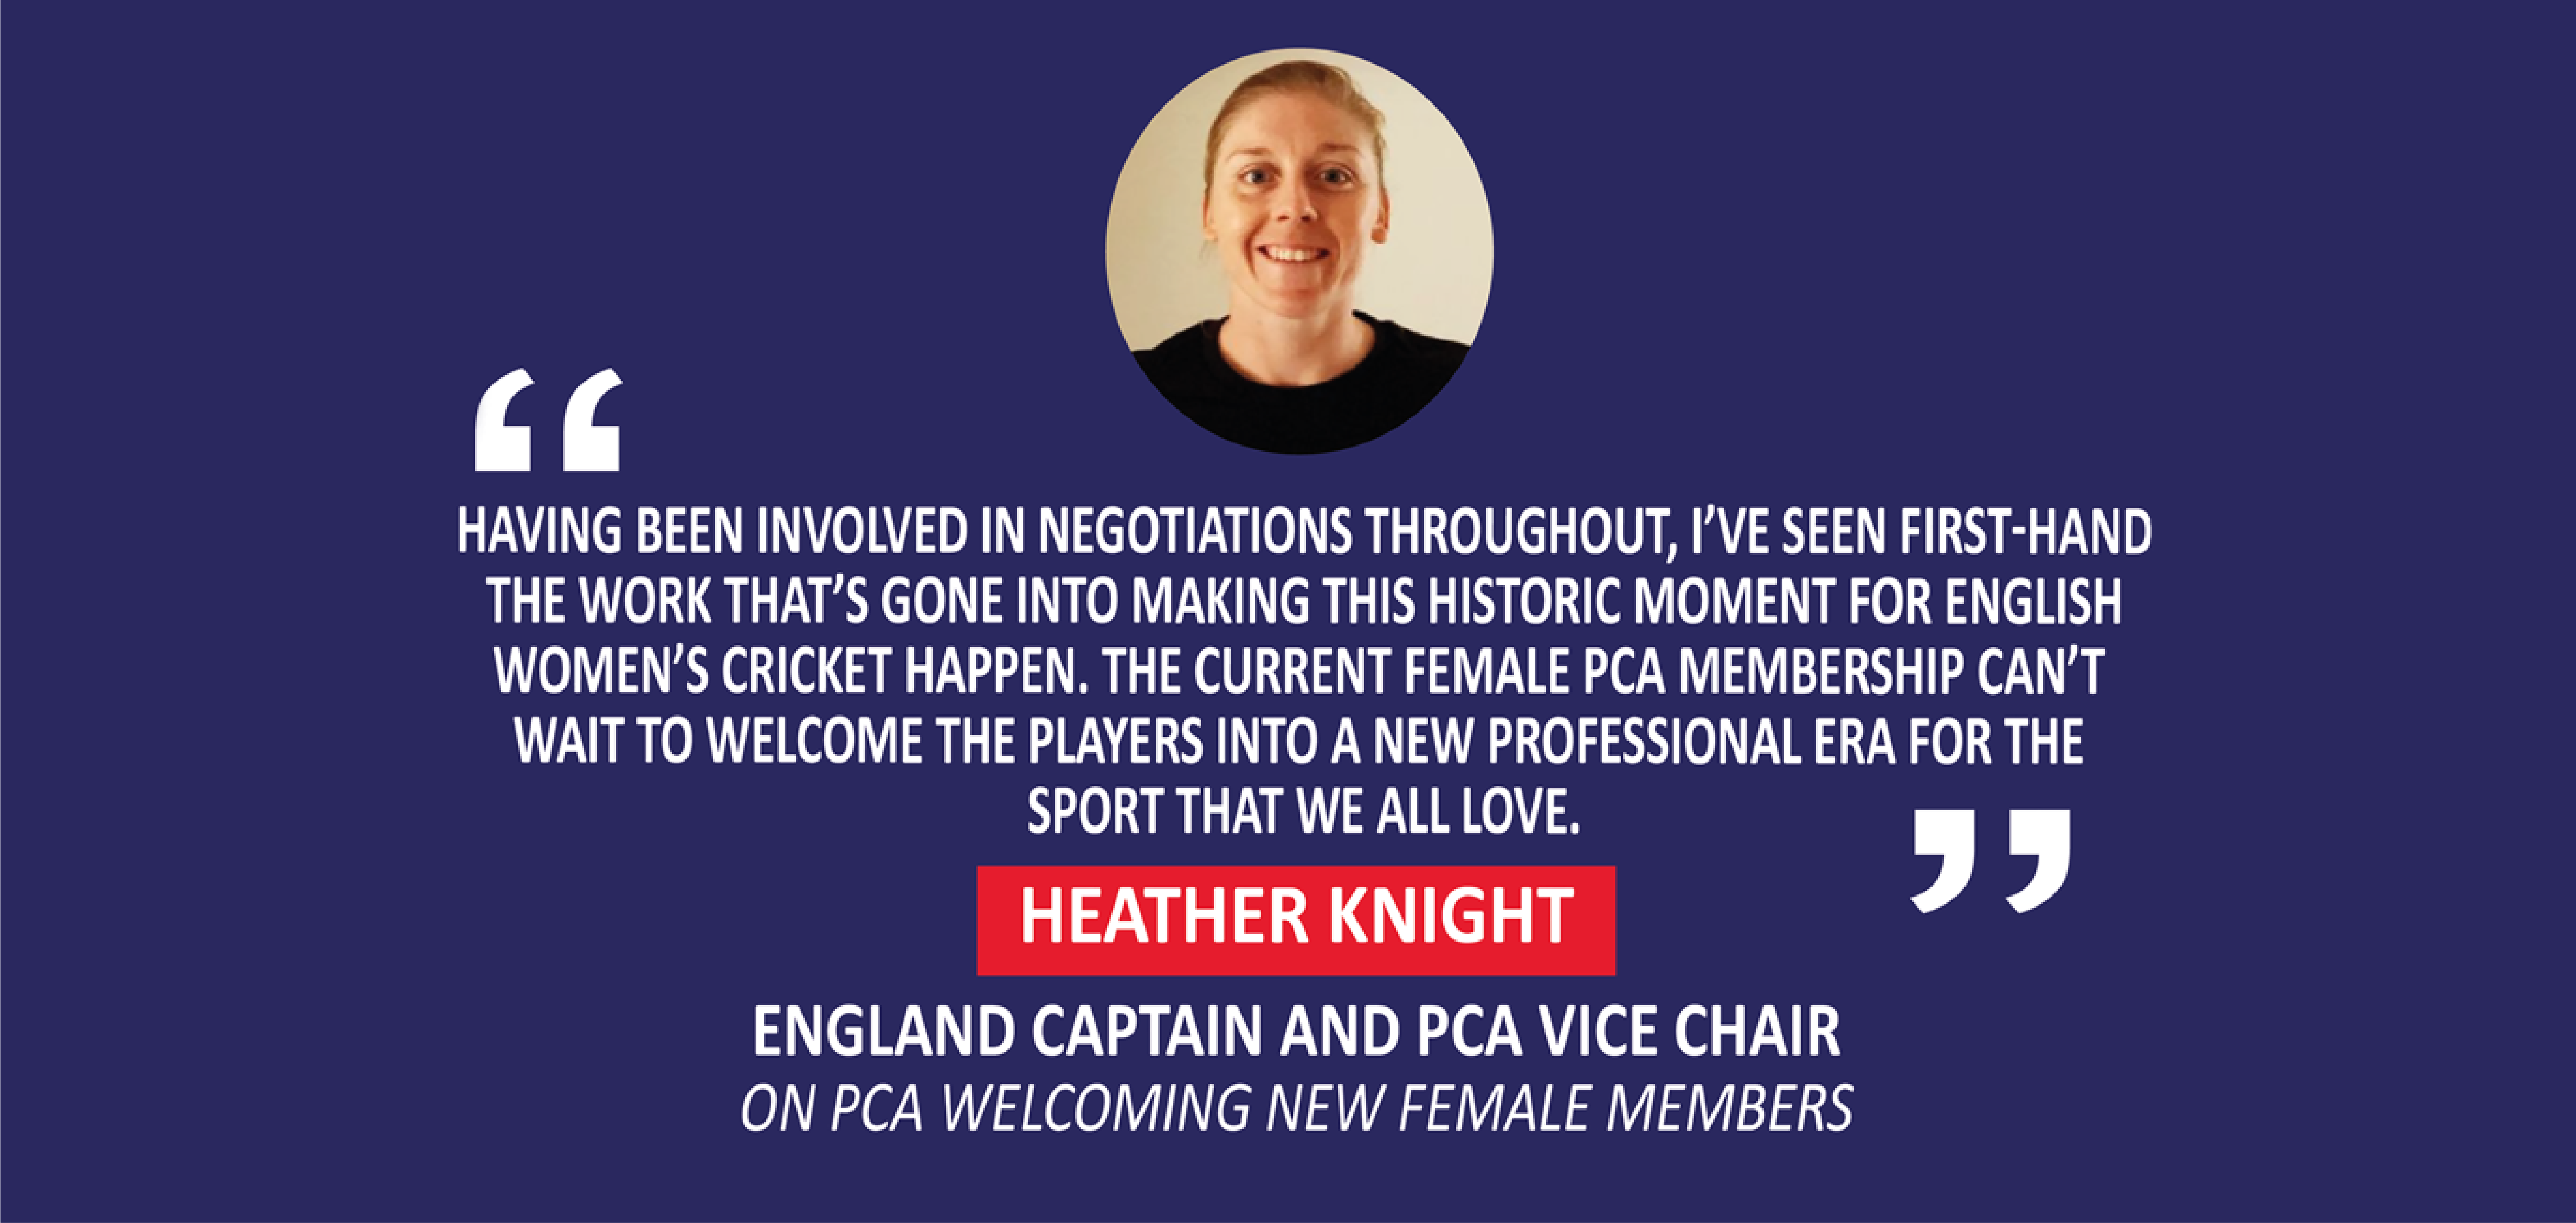 Heather Knight, England captain and PCA Vice Chair on PCA welcoming new female members